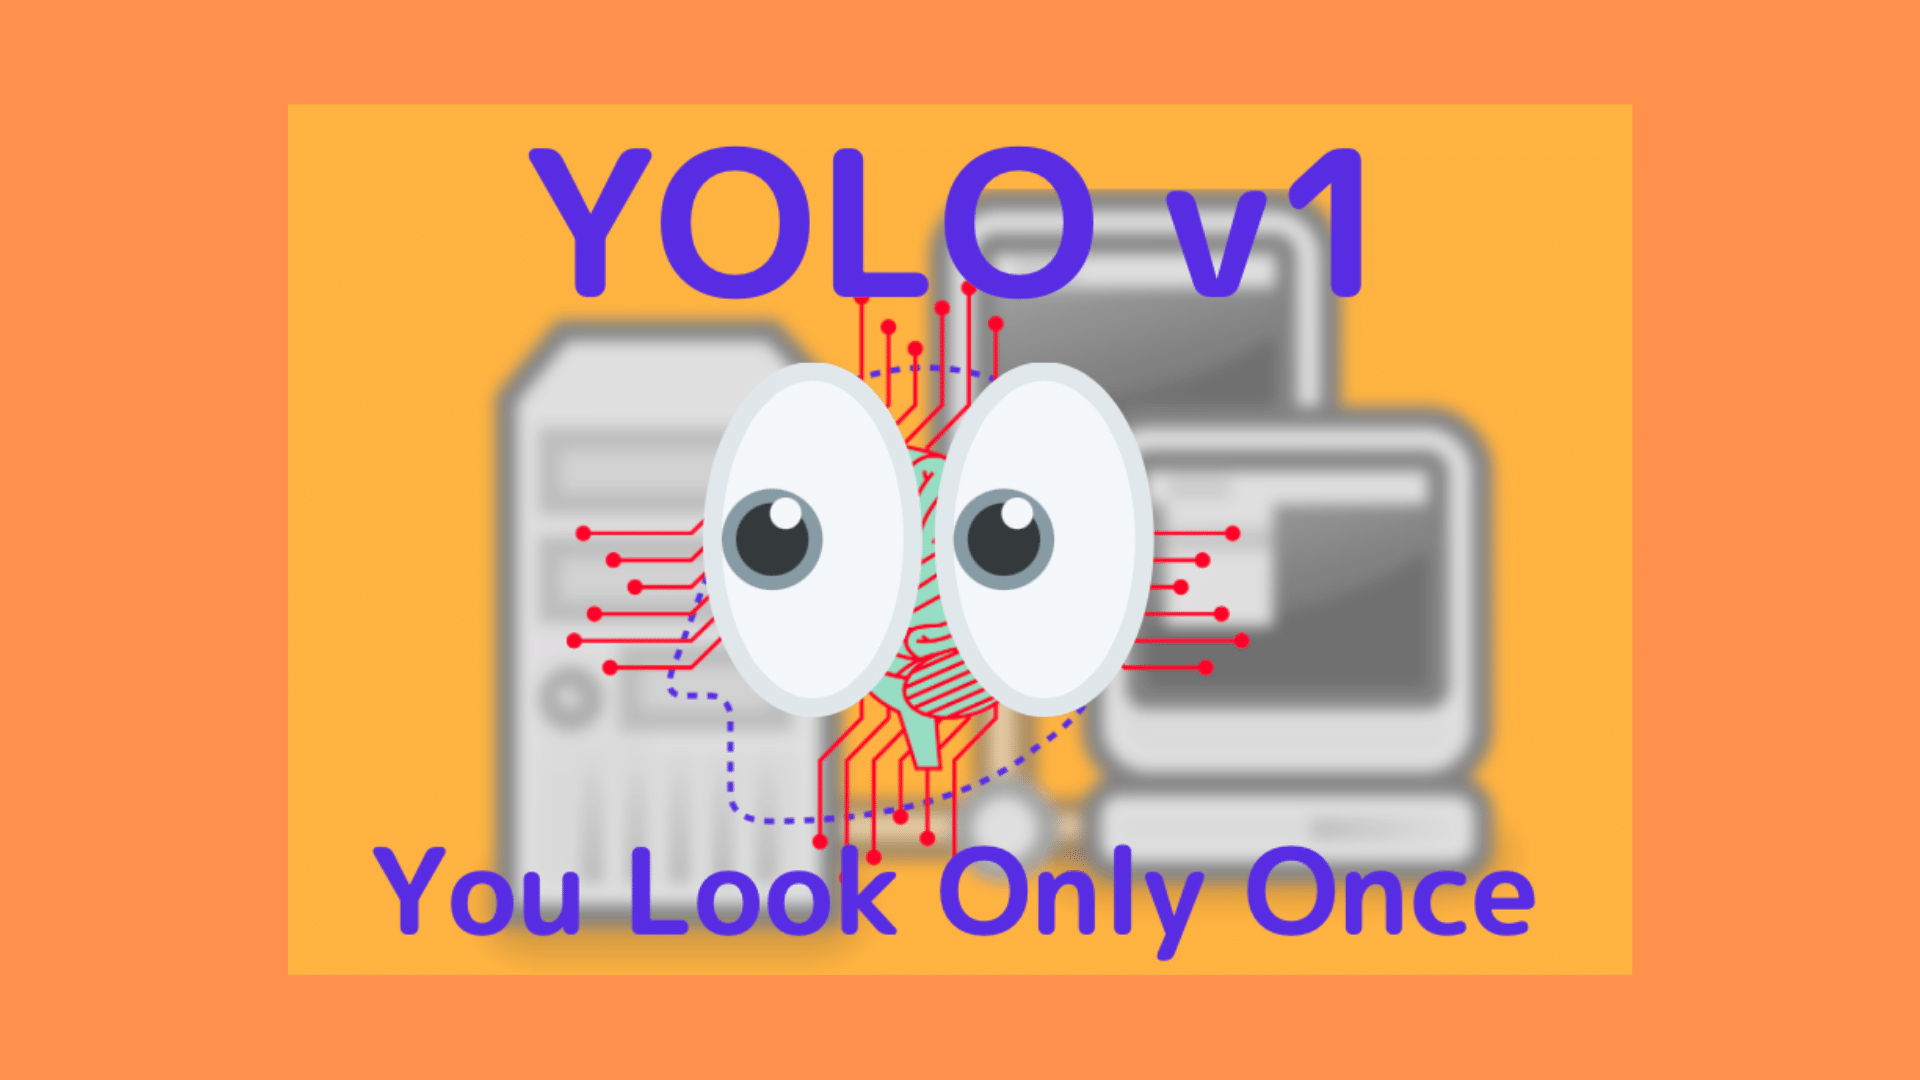 YOLO: You Look Only Once (The 1st Version)